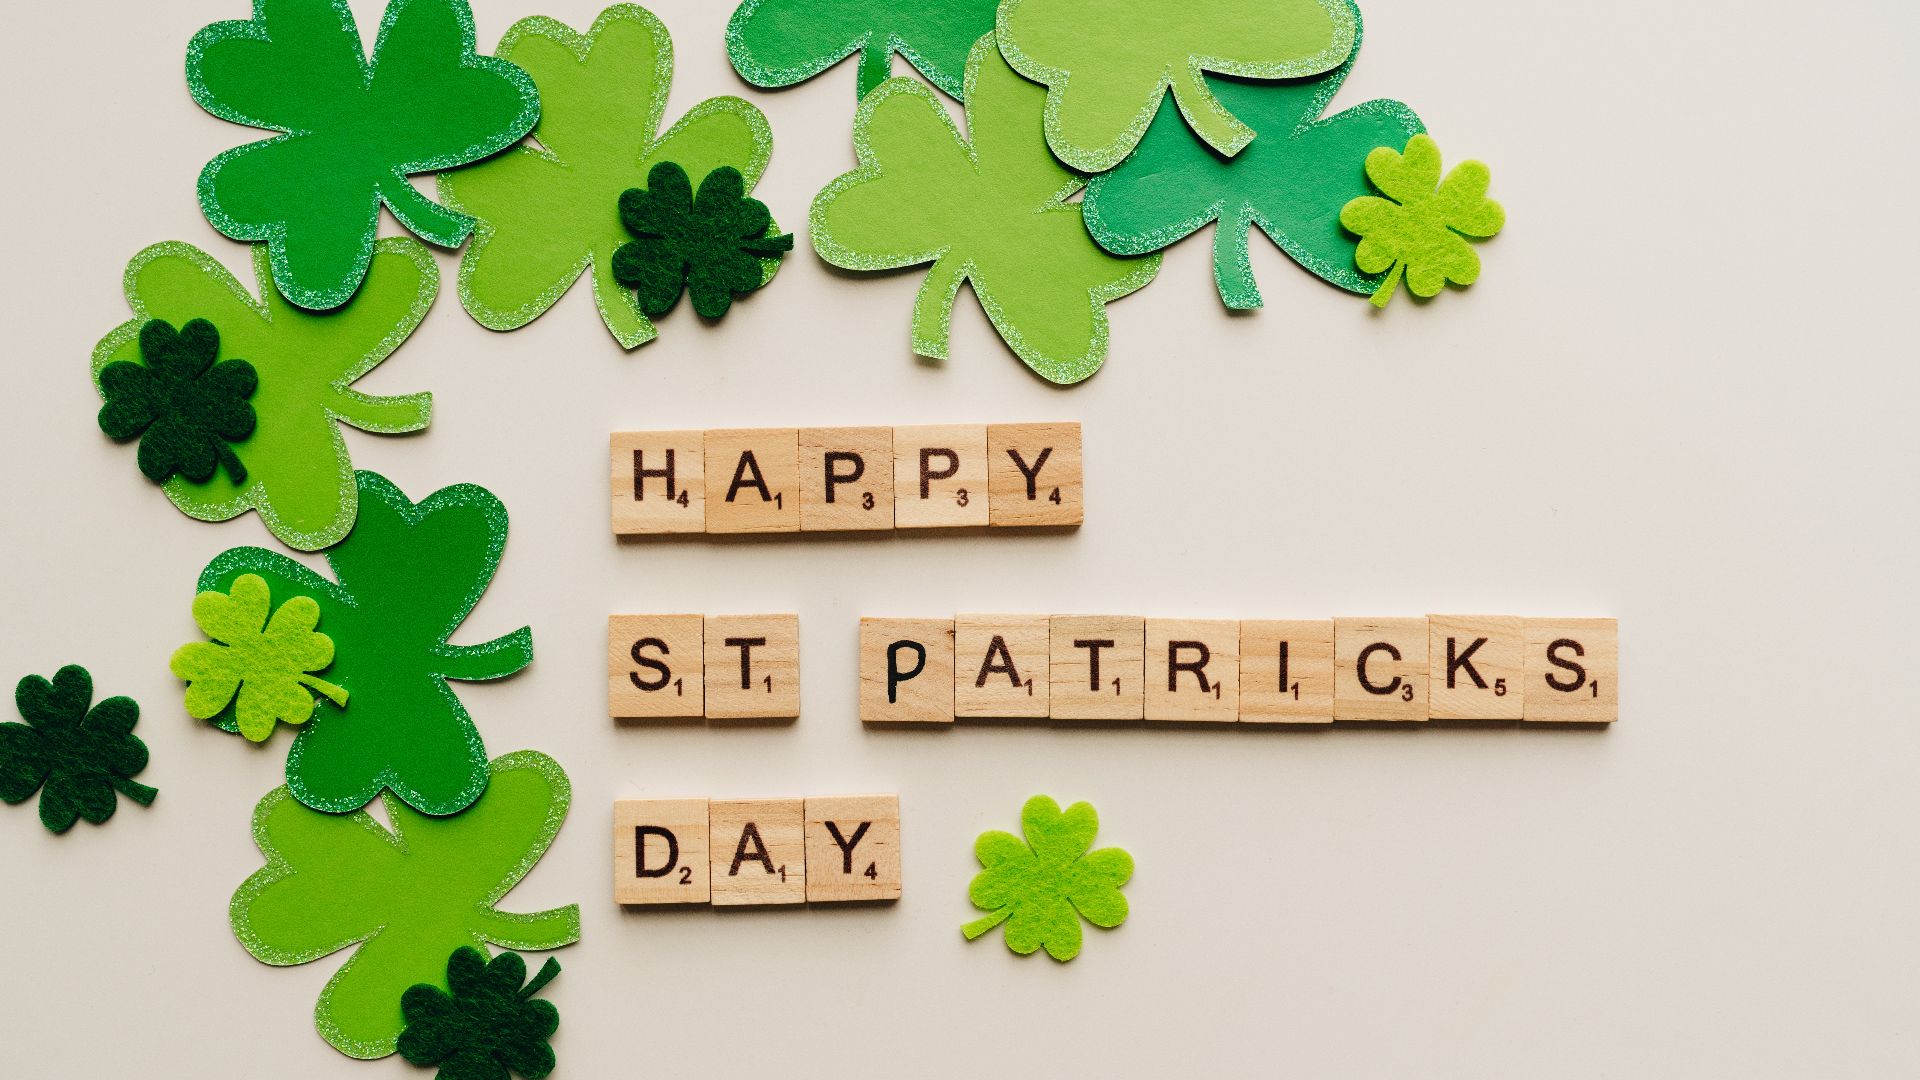 scrabble letters spelling out out St. Patrick's Day